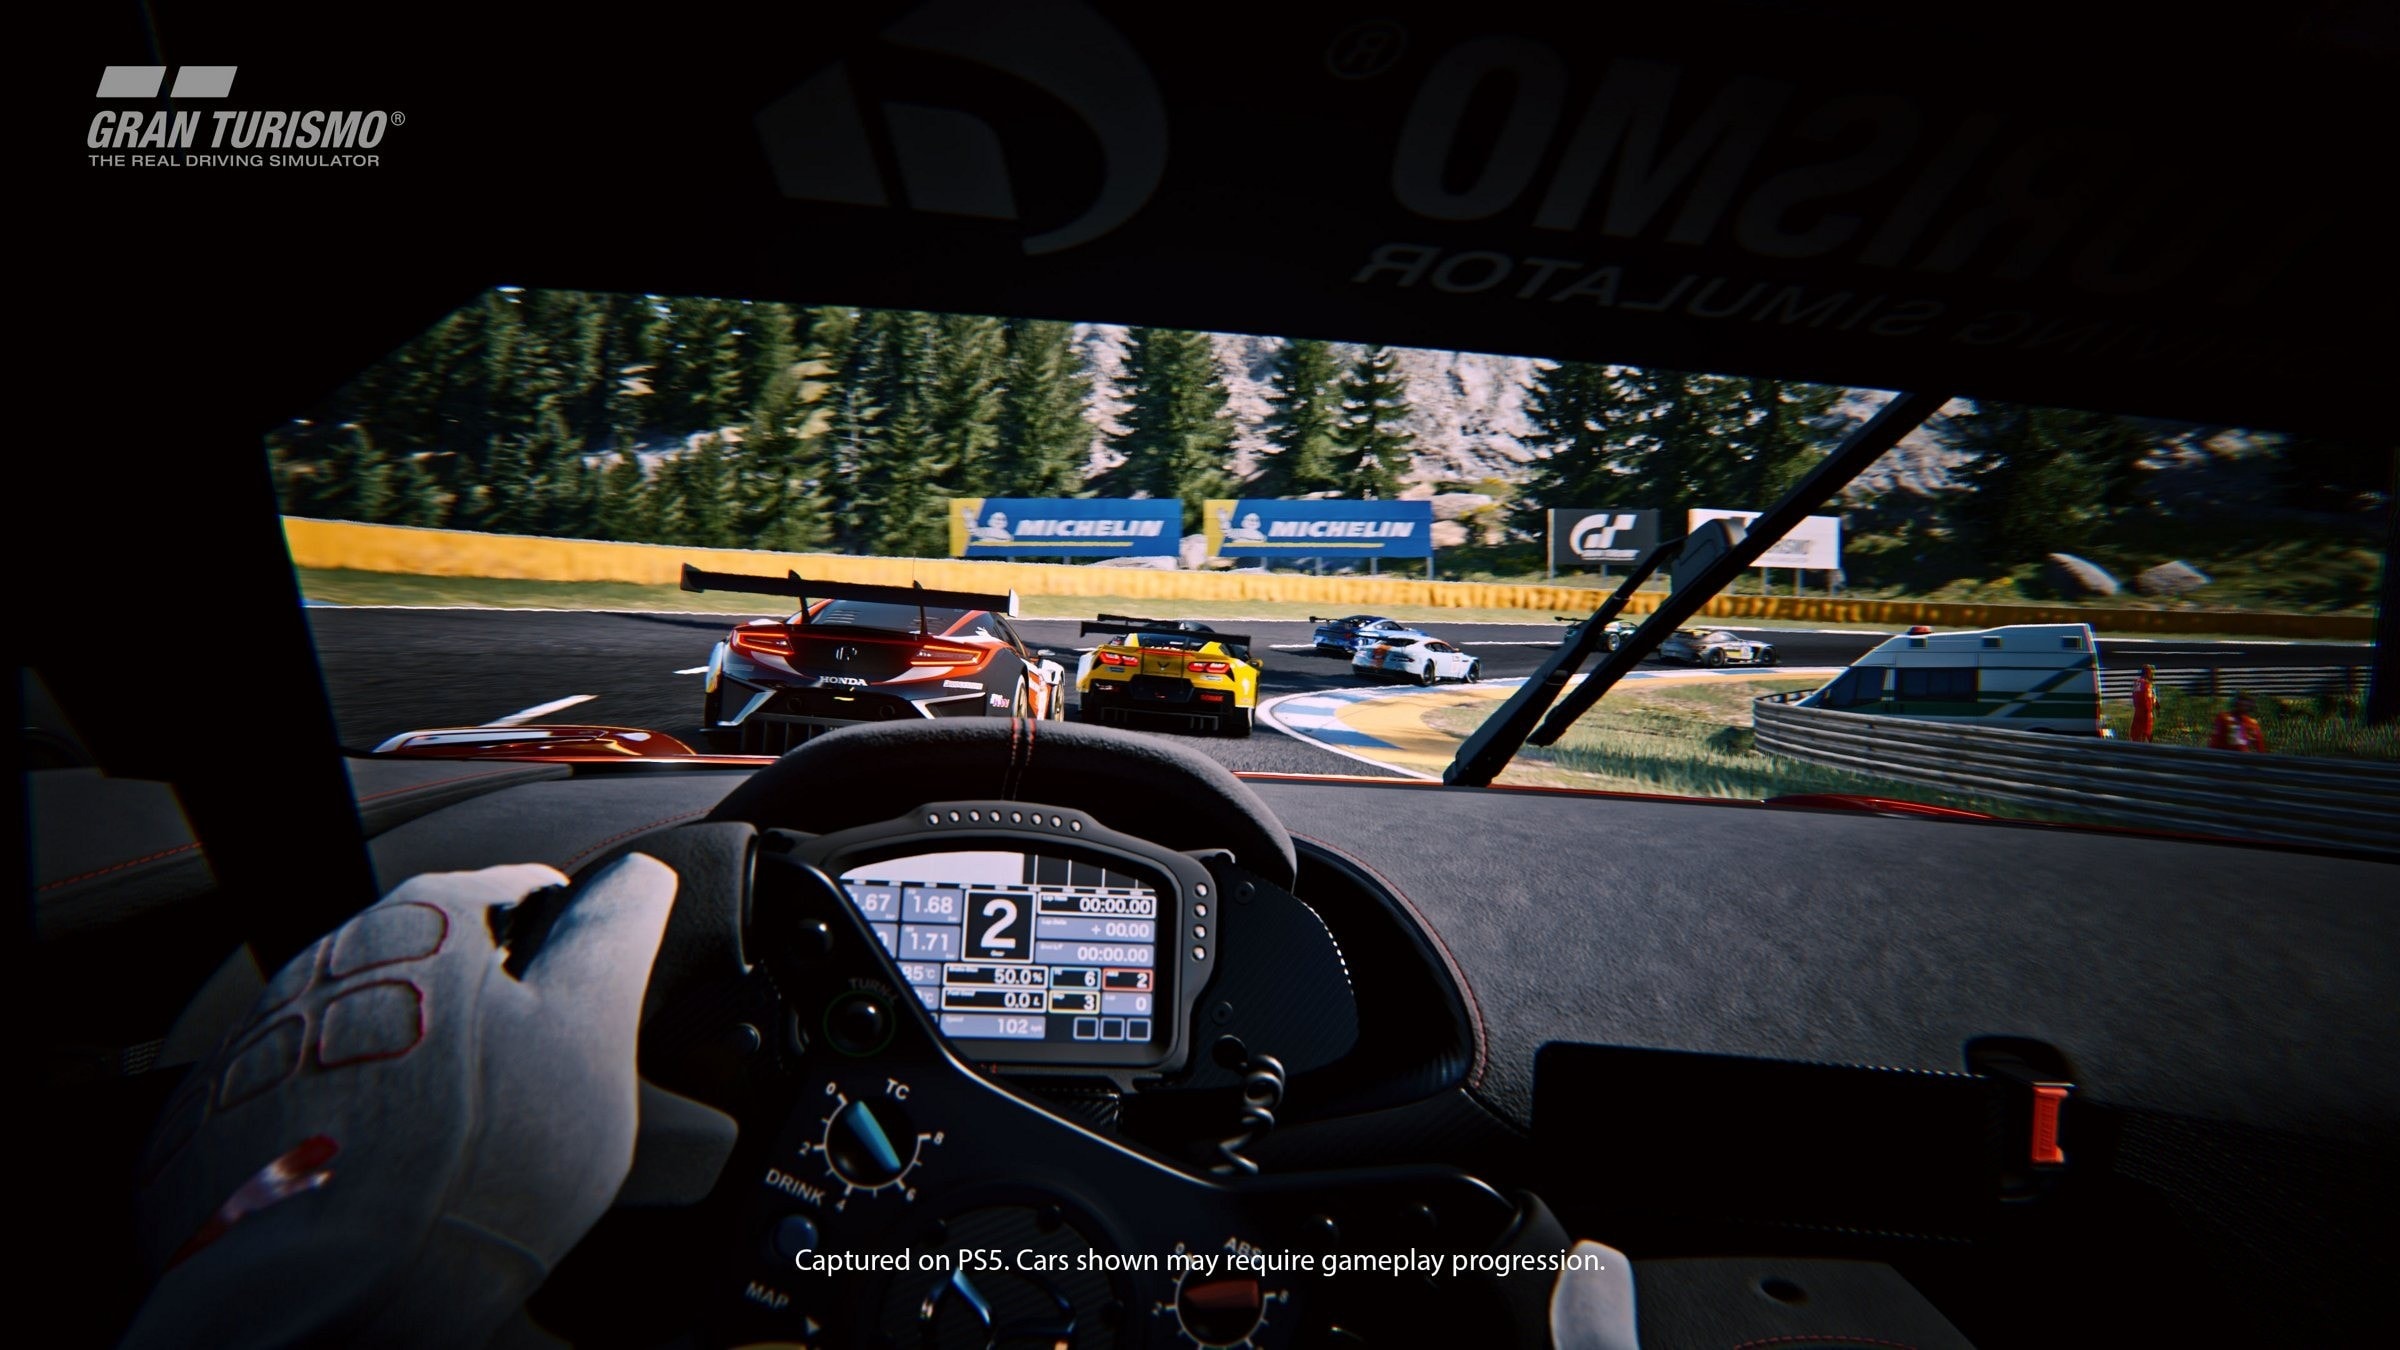 Sony Confirms Gran Turismo 7 Will Be a Cross-Gen Title to Launch on